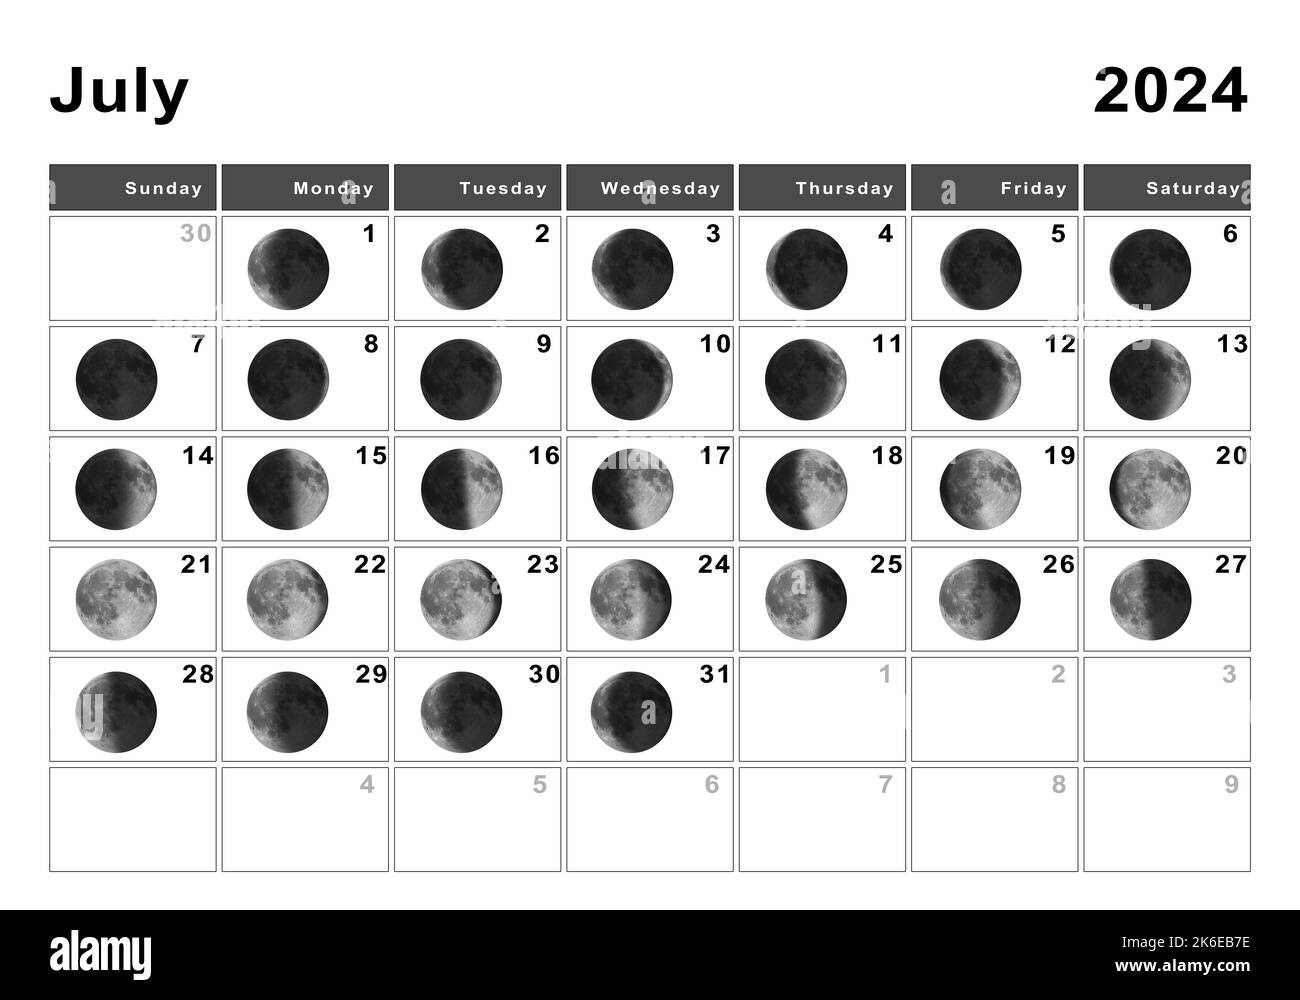 July 2024 Lunar Calendar, Moon Cycles, Moon Phases Stock Photo - Alamy throughout July Moon Phase Calendar 2024